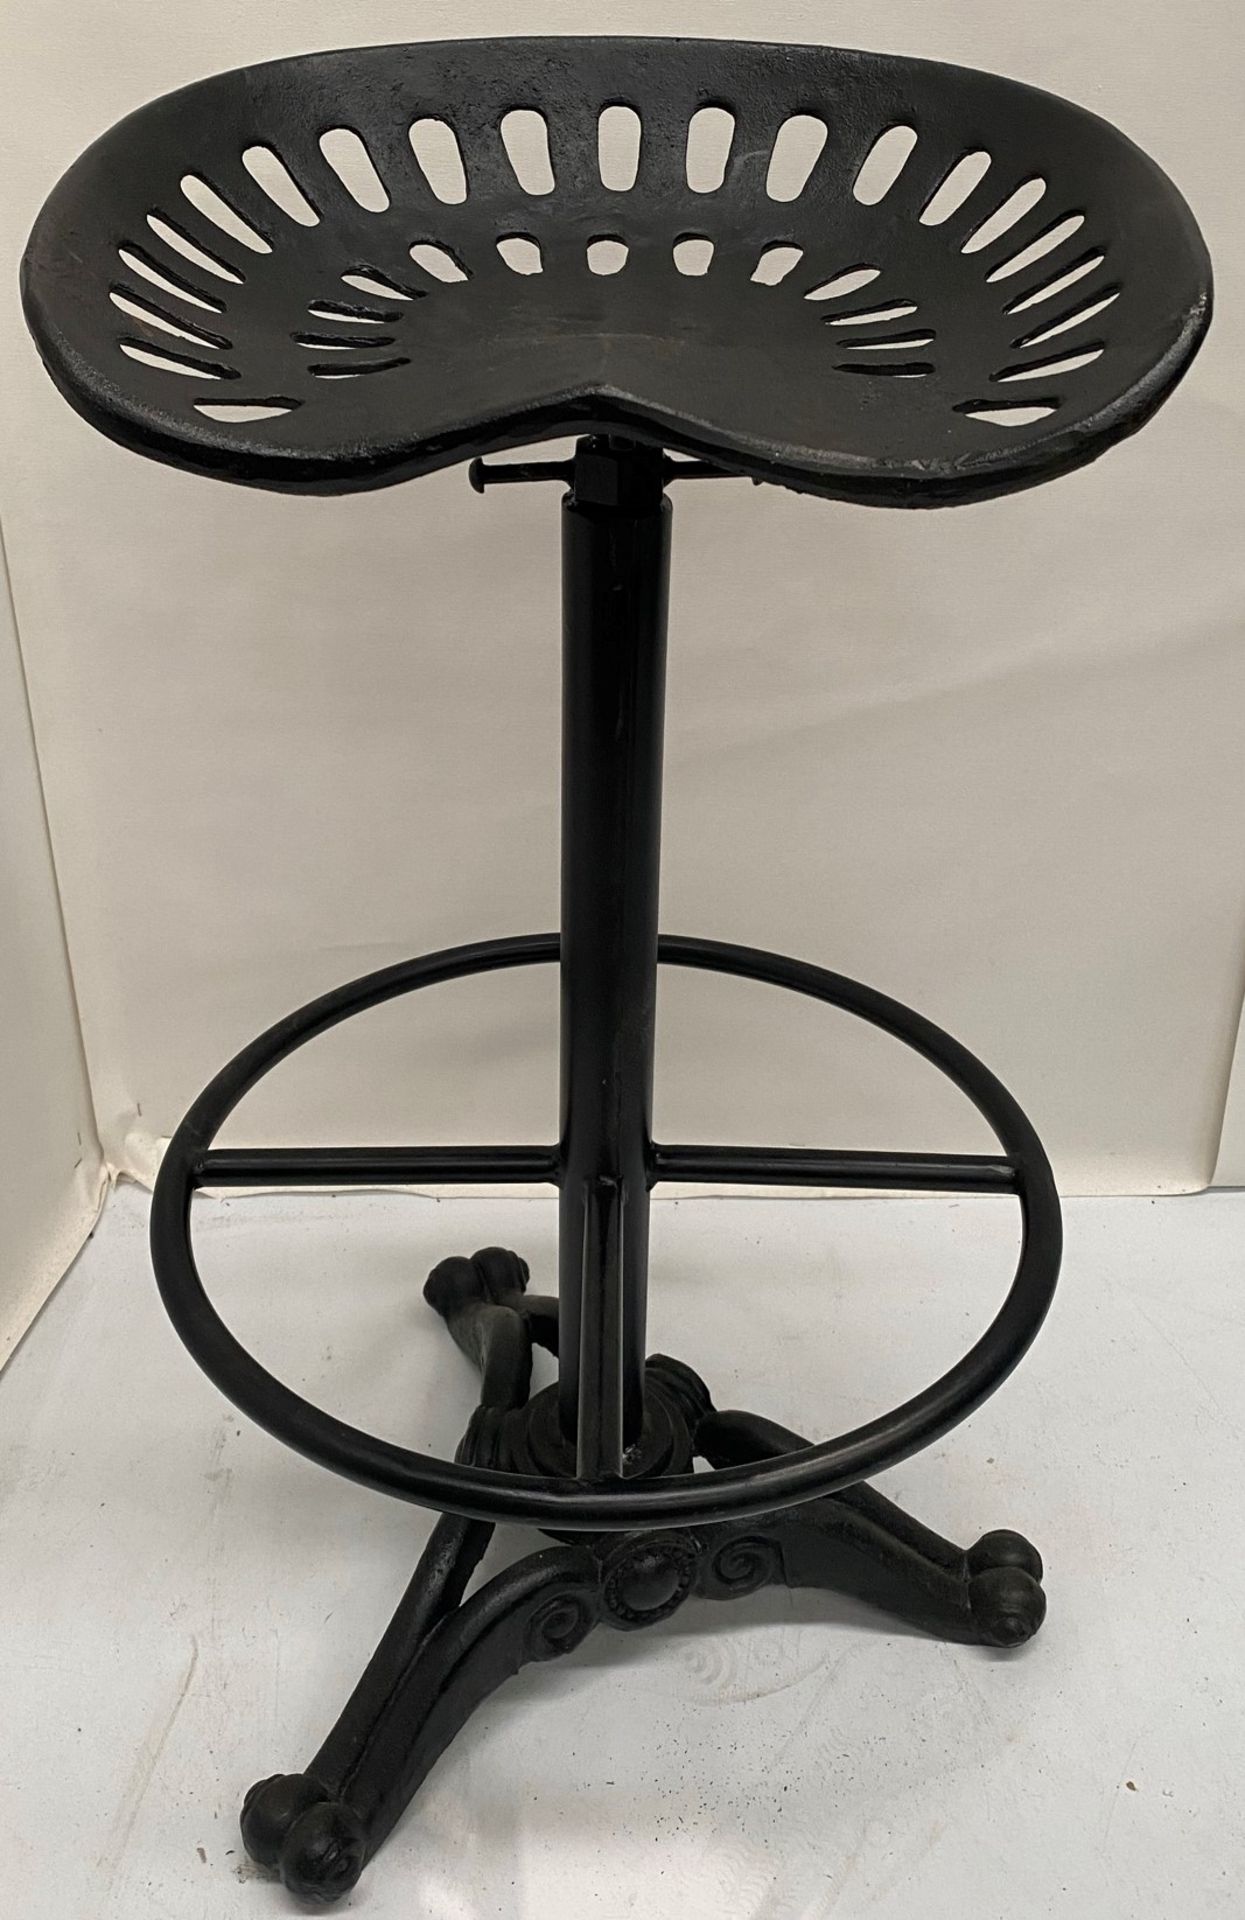 1 x heavy wrought iron adjustable bar stool with foot rest on trefoil base - adjustable height - Image 4 of 4